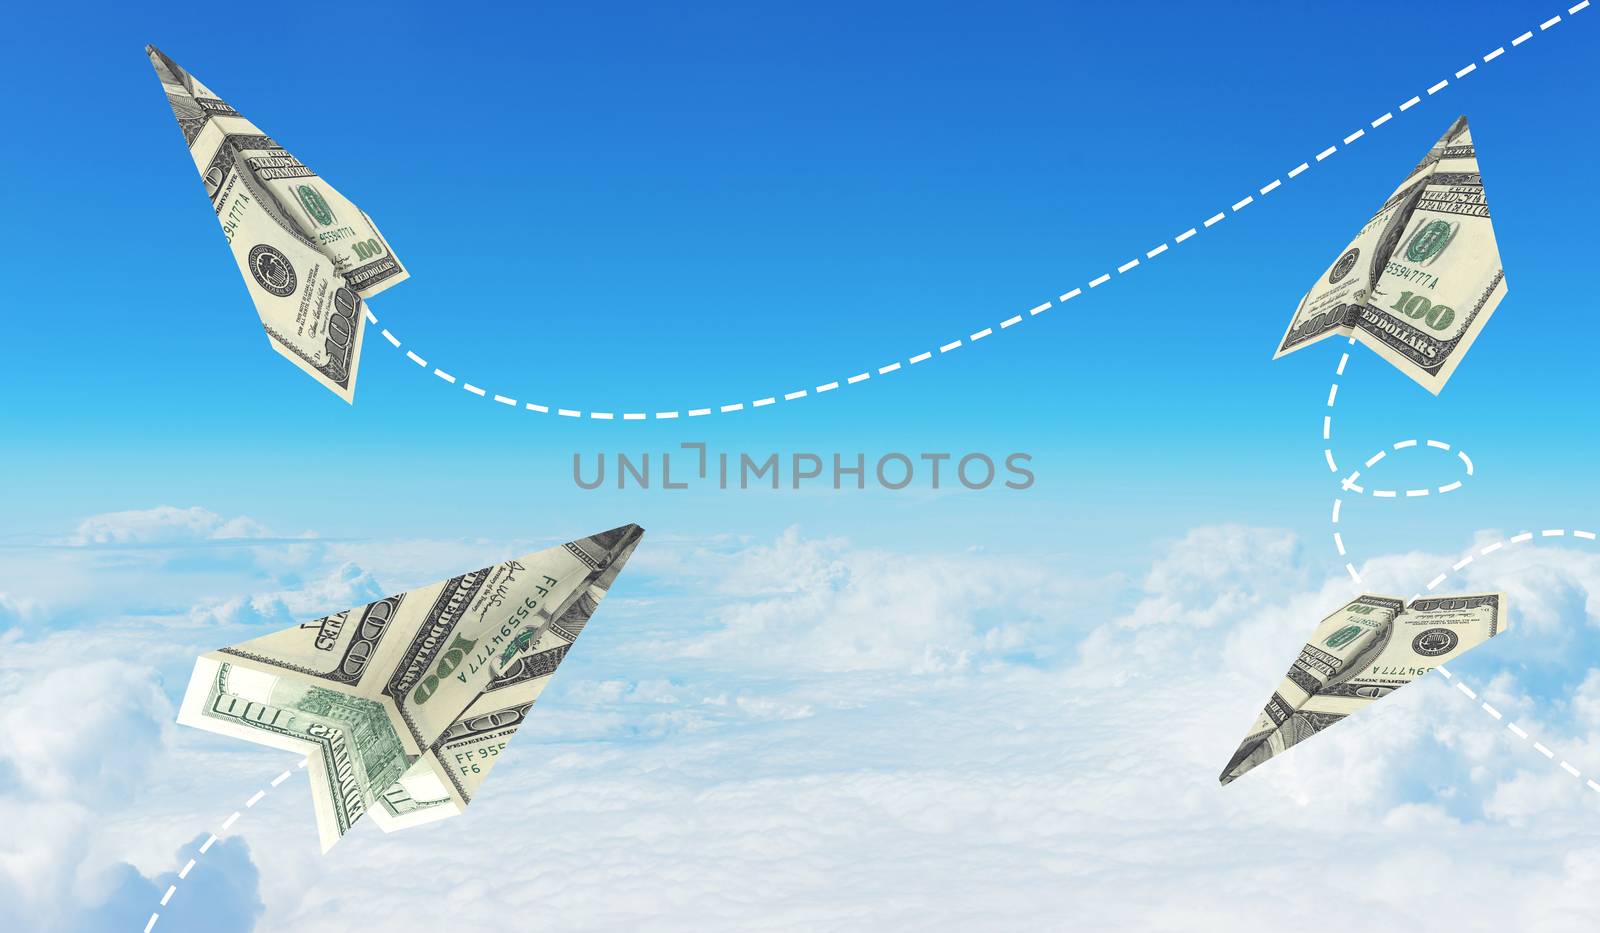 Paper airplanes made of hundred dollar bills. Sky and clouds in the background